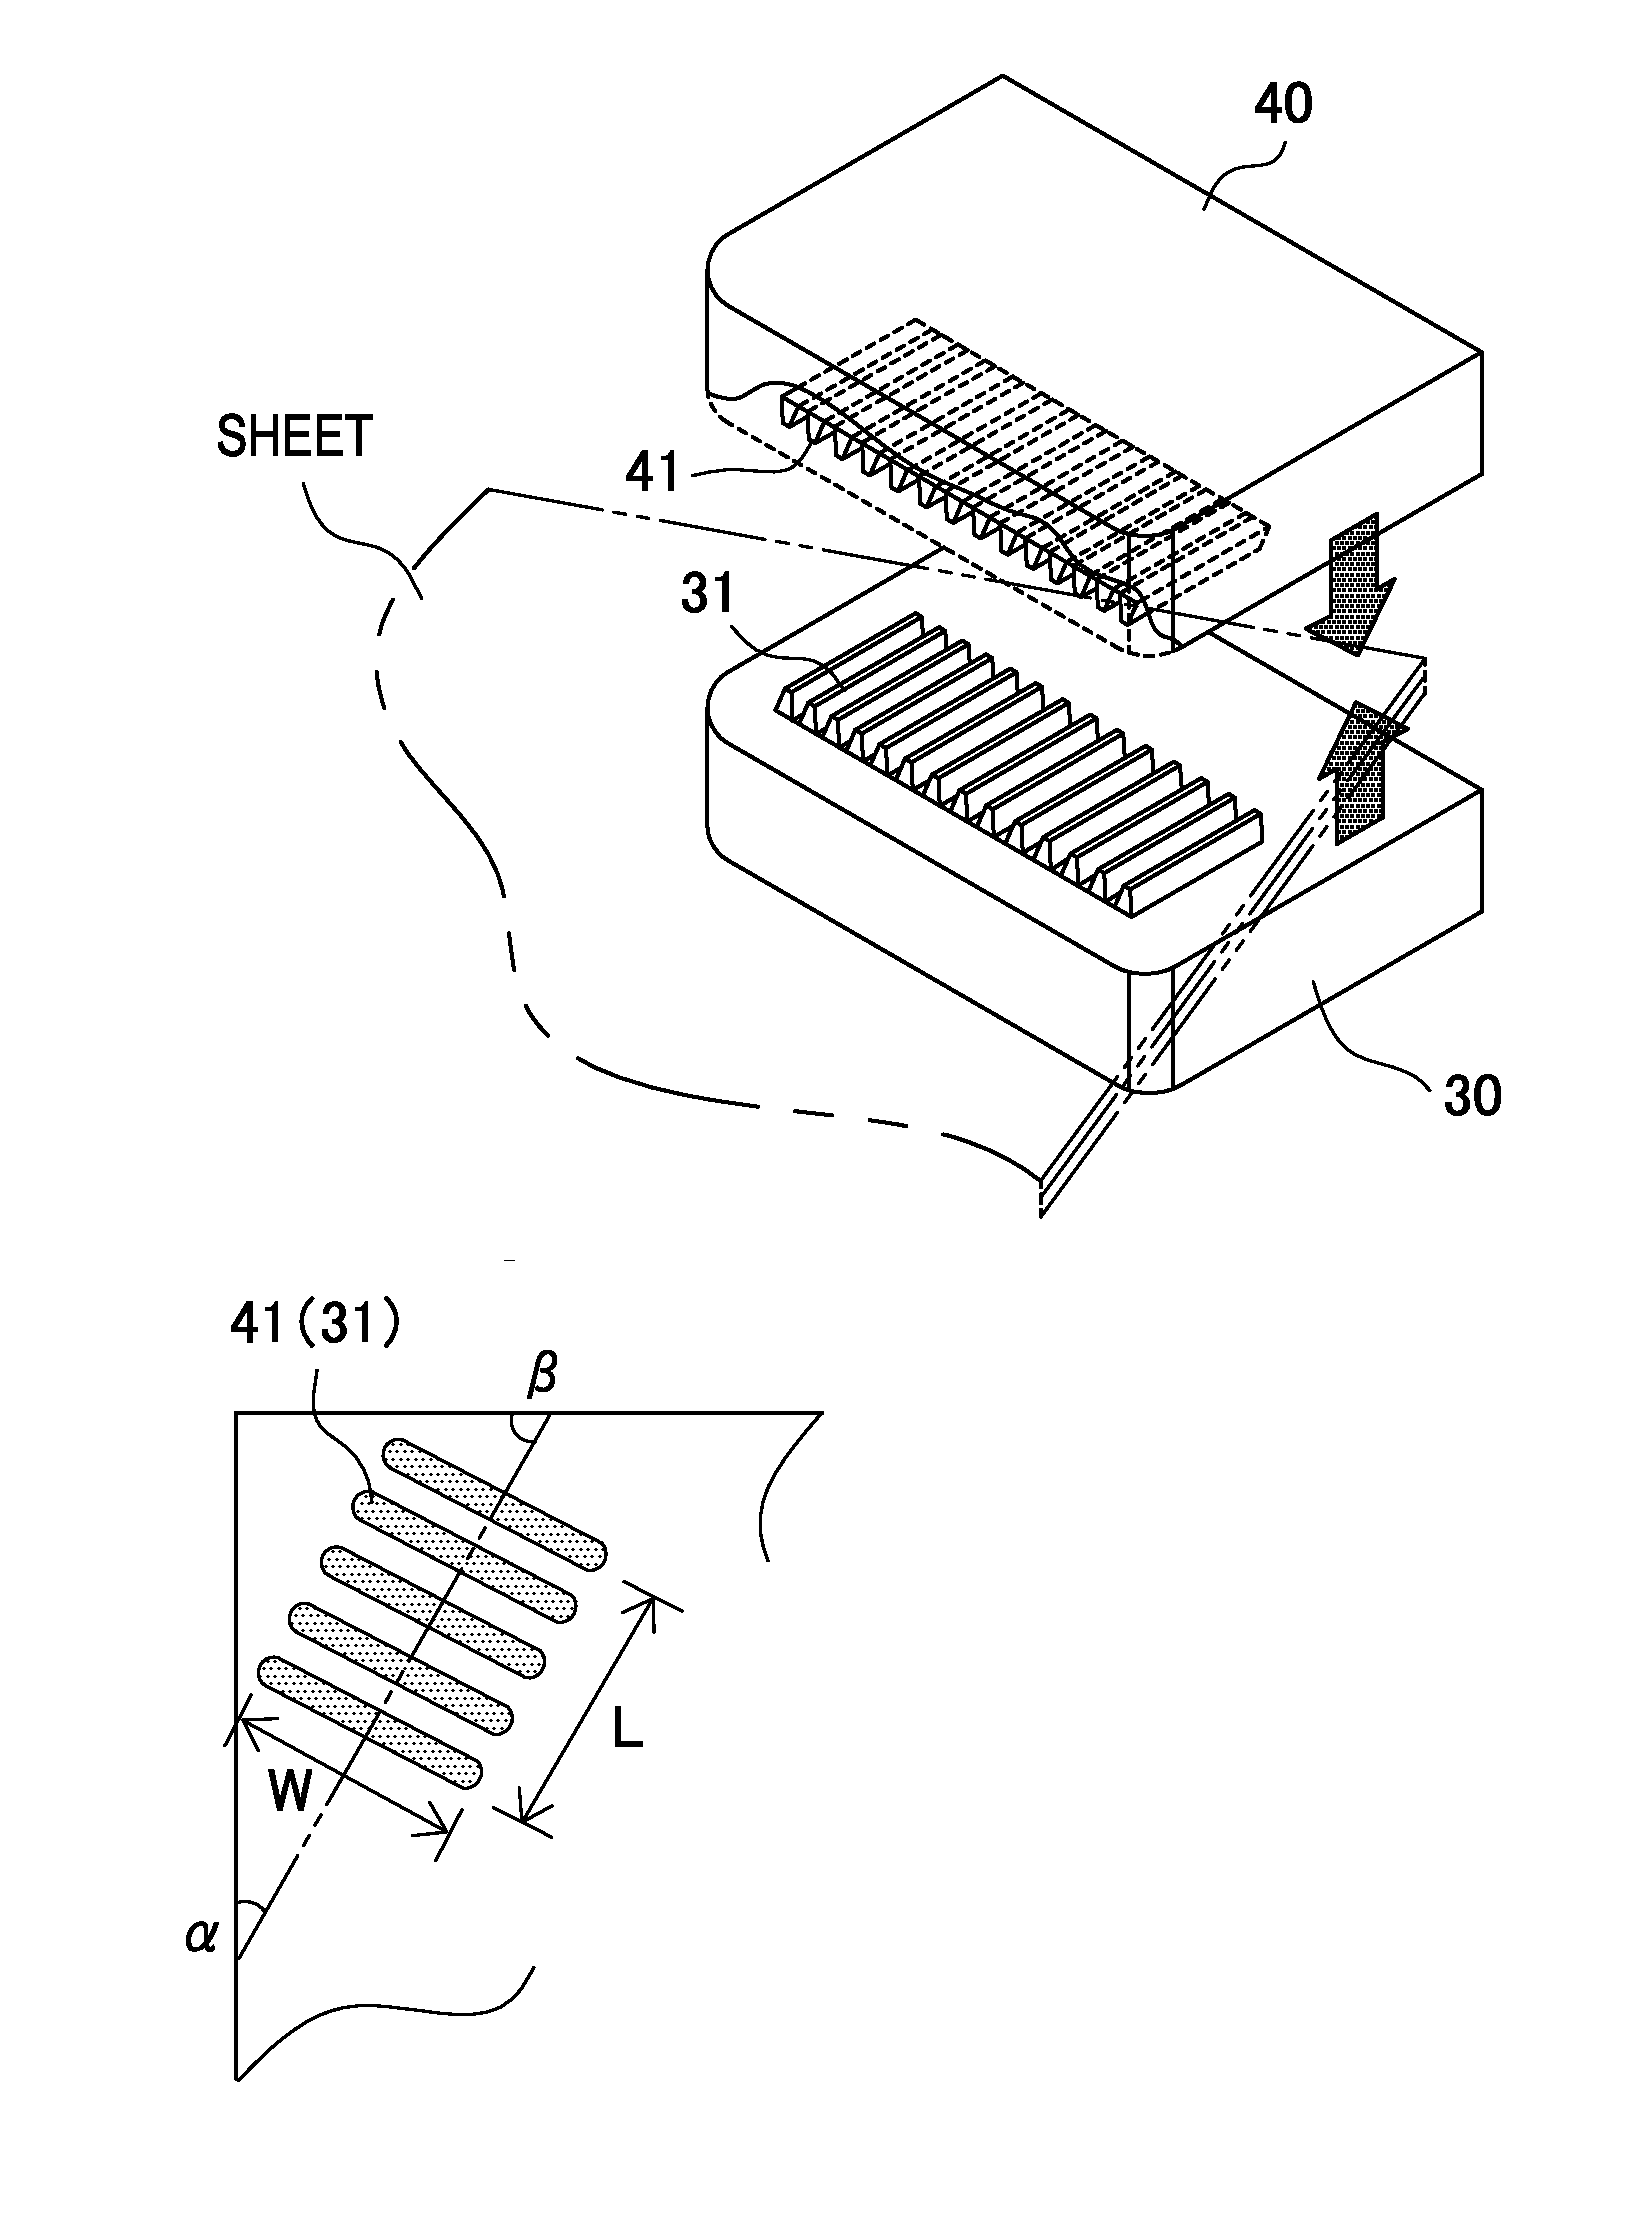 Apparatus for performing binding processing on sheets and post-processing apparatus provided with the same